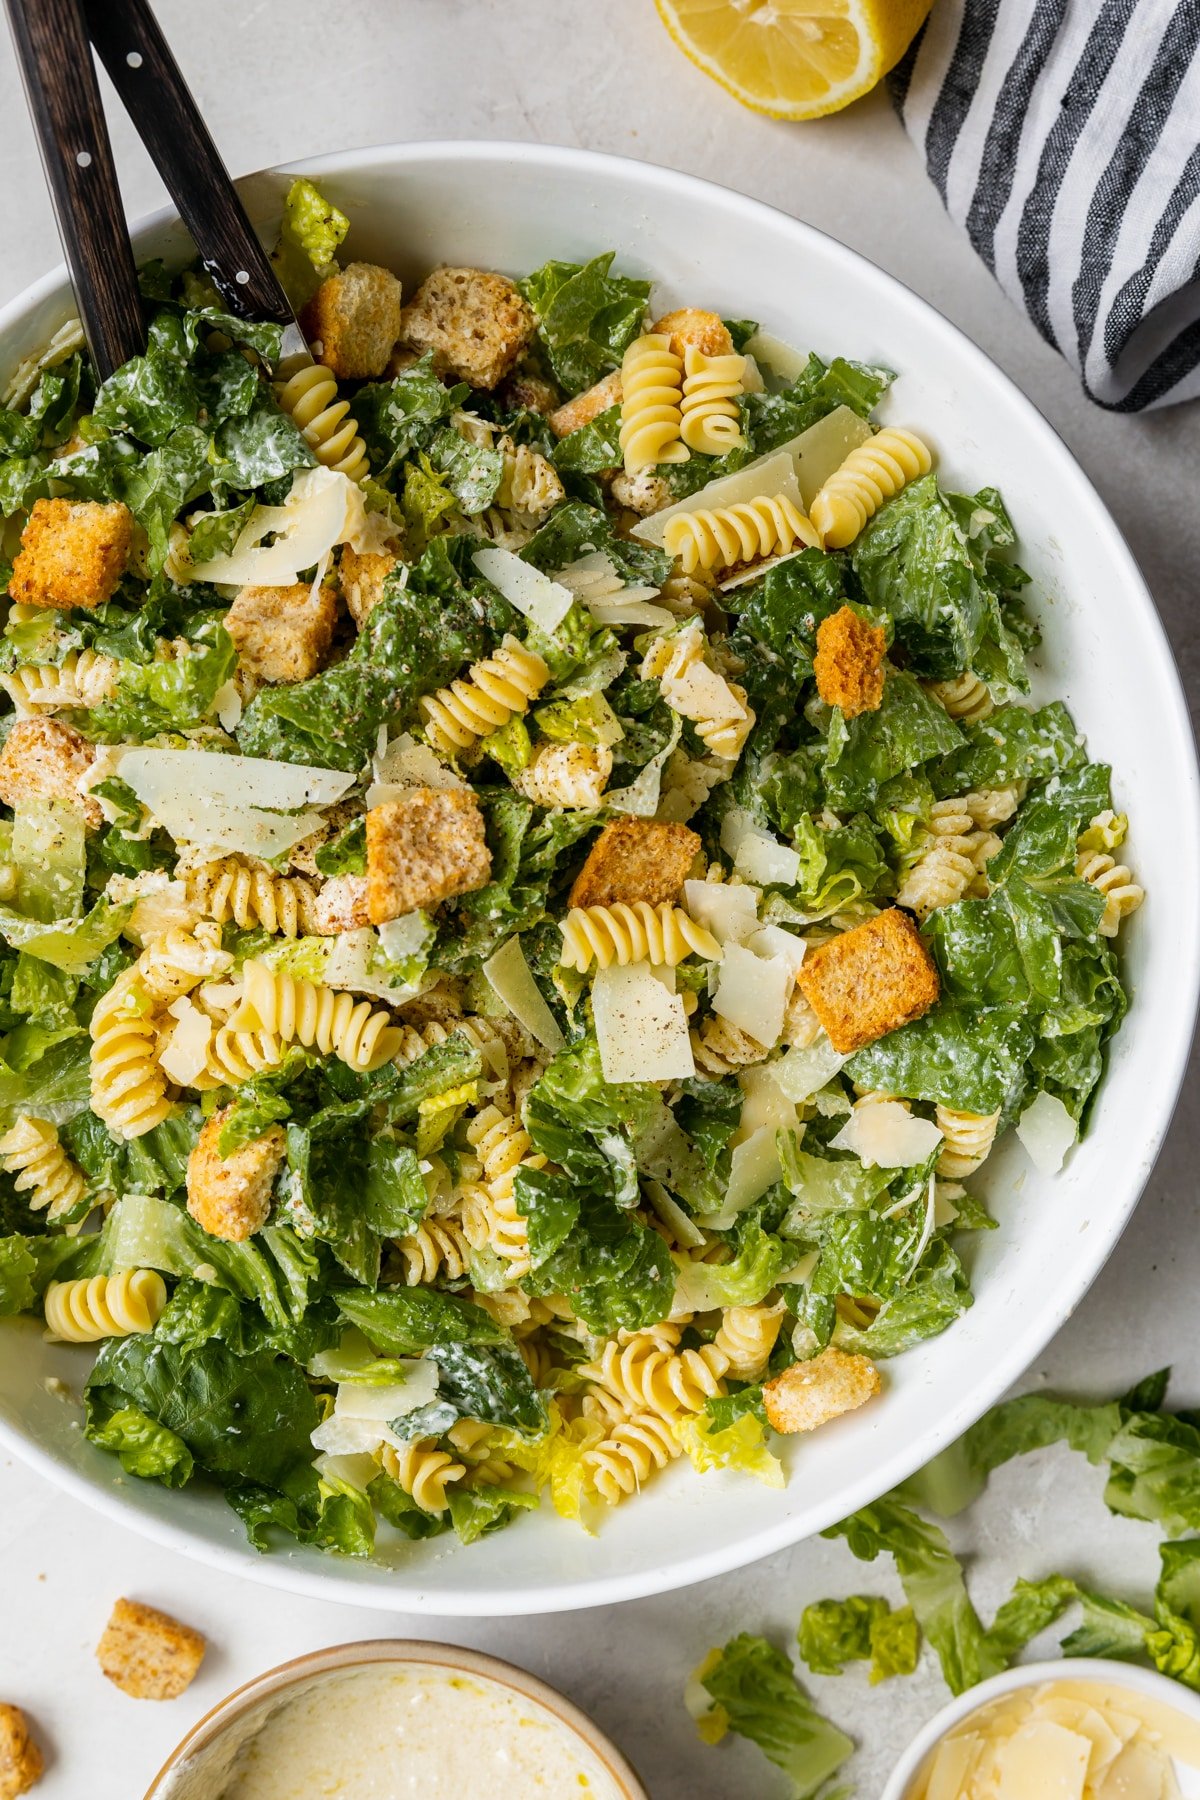 caesar salad in a bowl with parmesan cheese, croutons and rotini pasta.